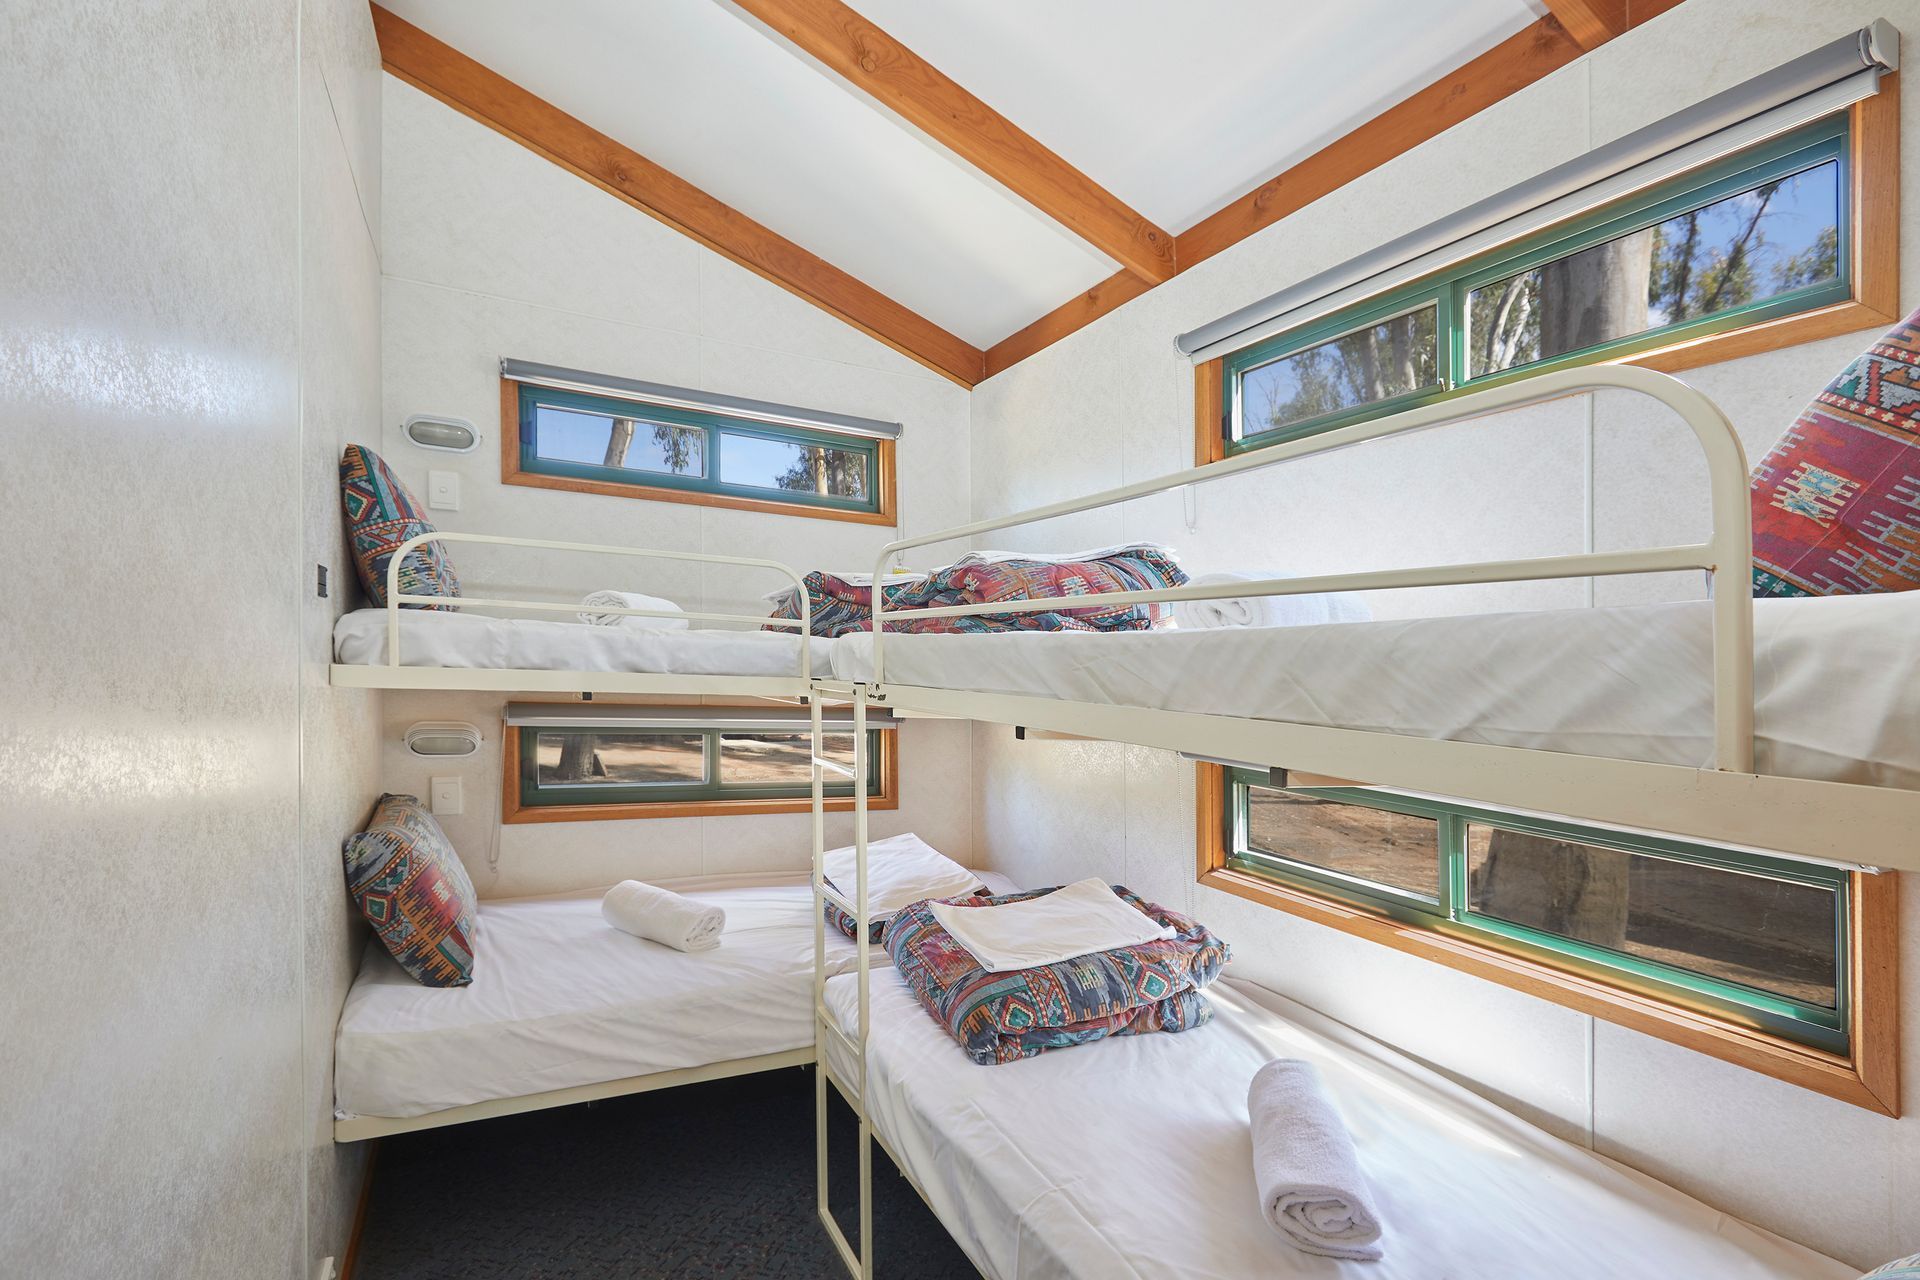 Apex Riverbeach Holiday Park cabin's bedroom with four bunk beds and individual windows .